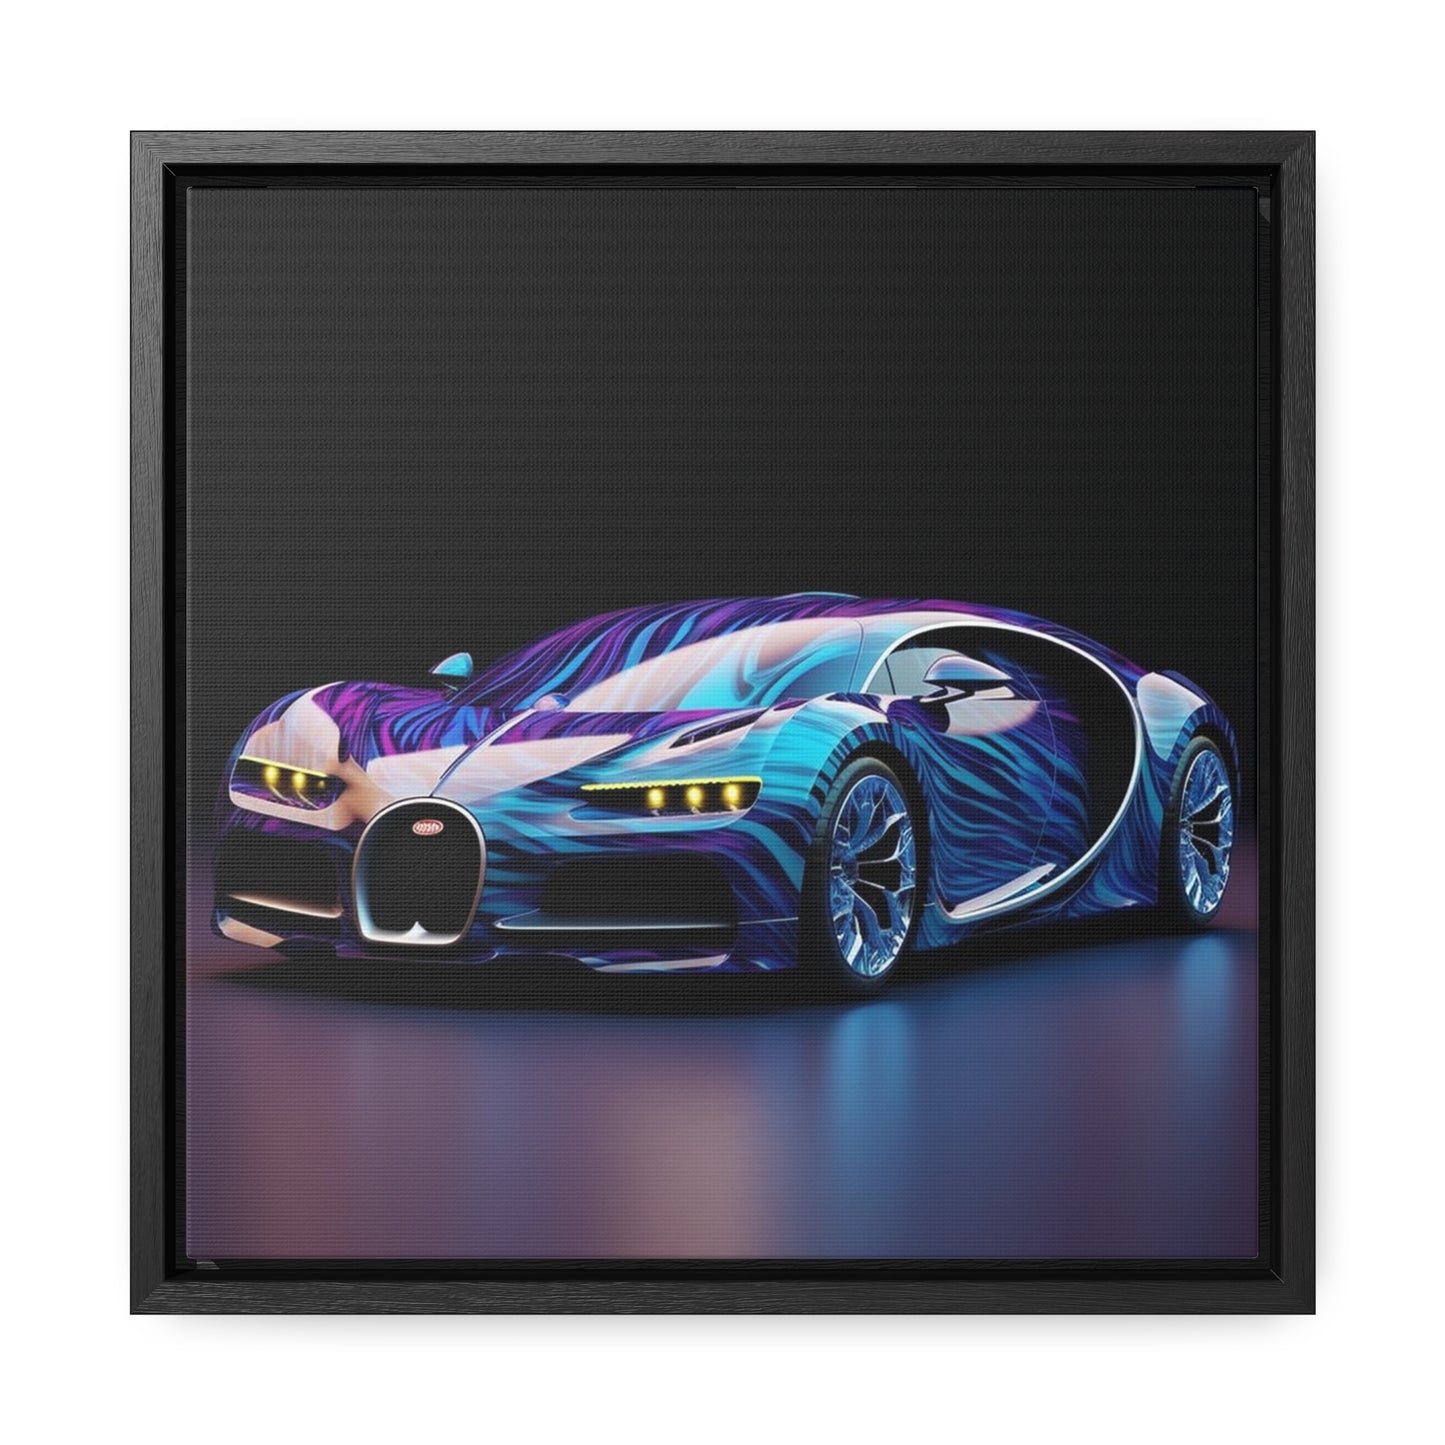 Gallery Canvas Wraps, Square Frame Bugatti Abstract Flair 3